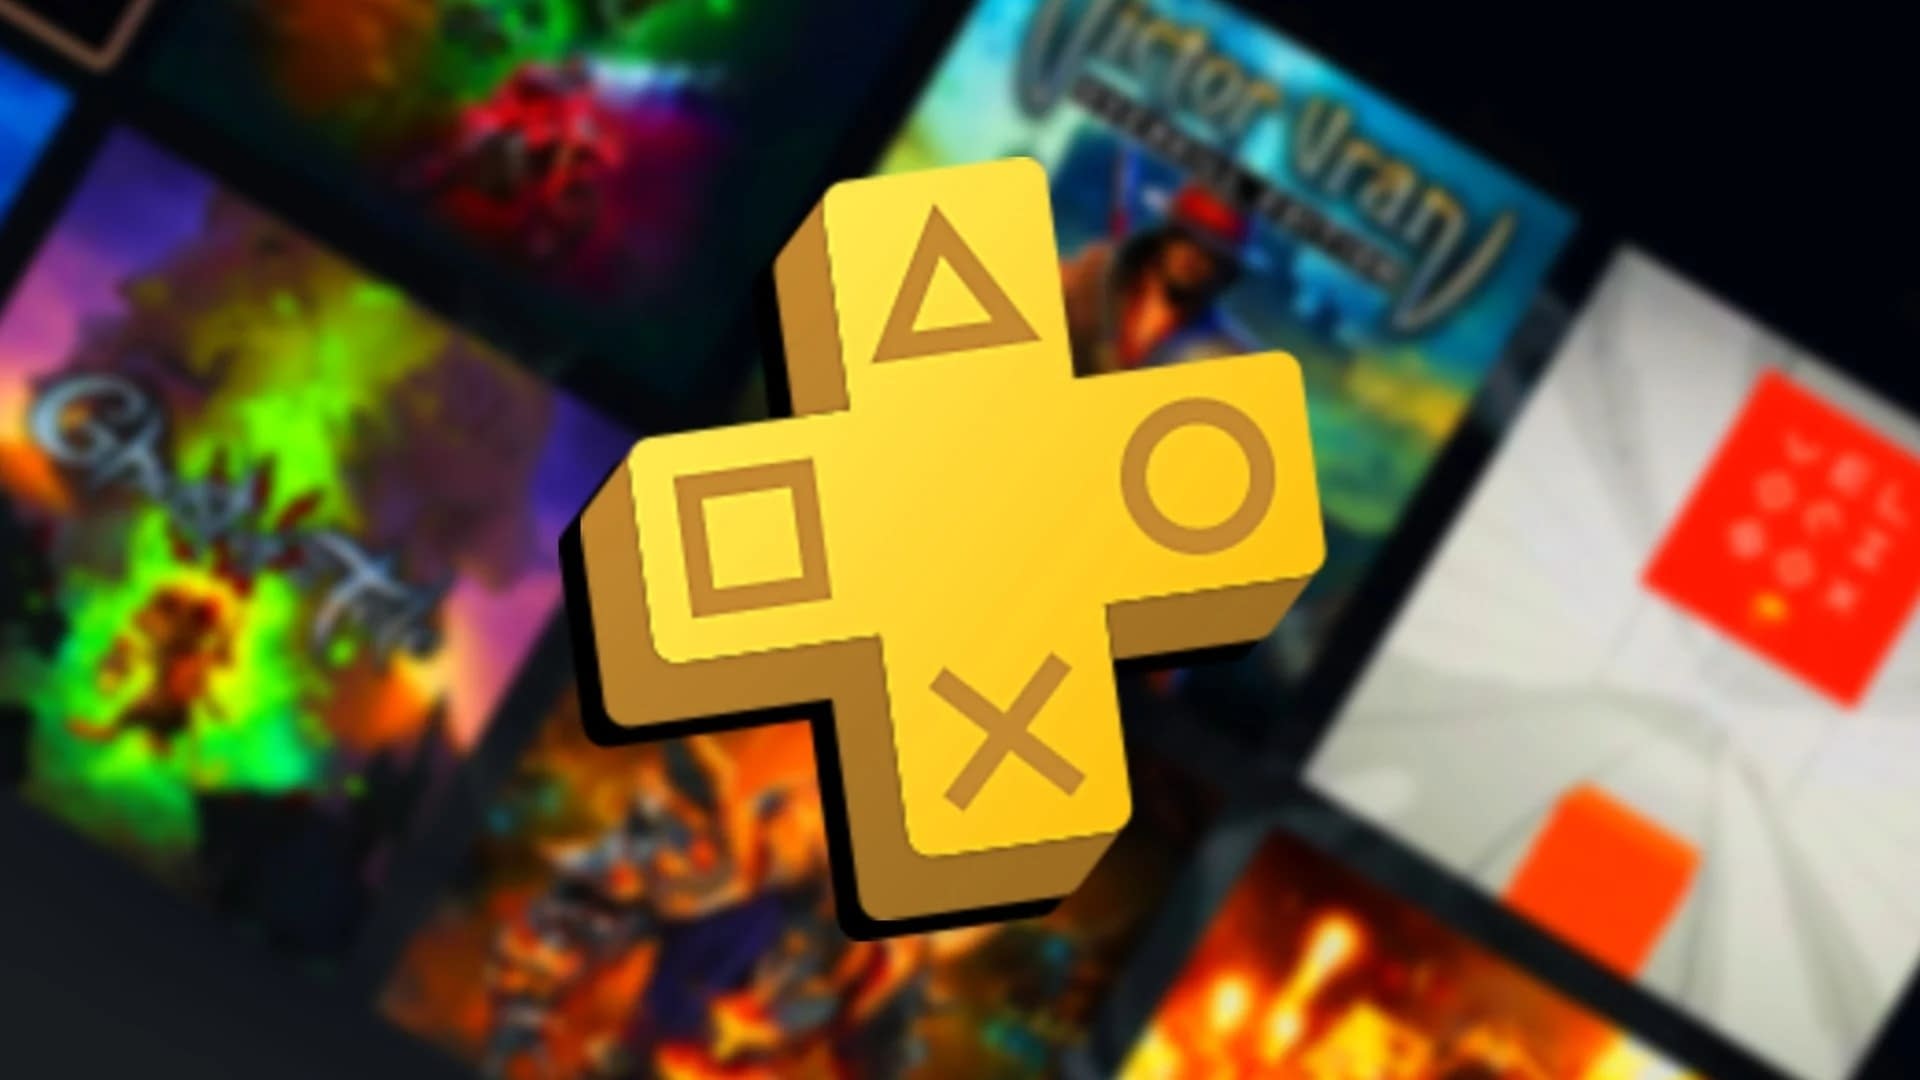 In March 9 game is removed from Playstation Plus library